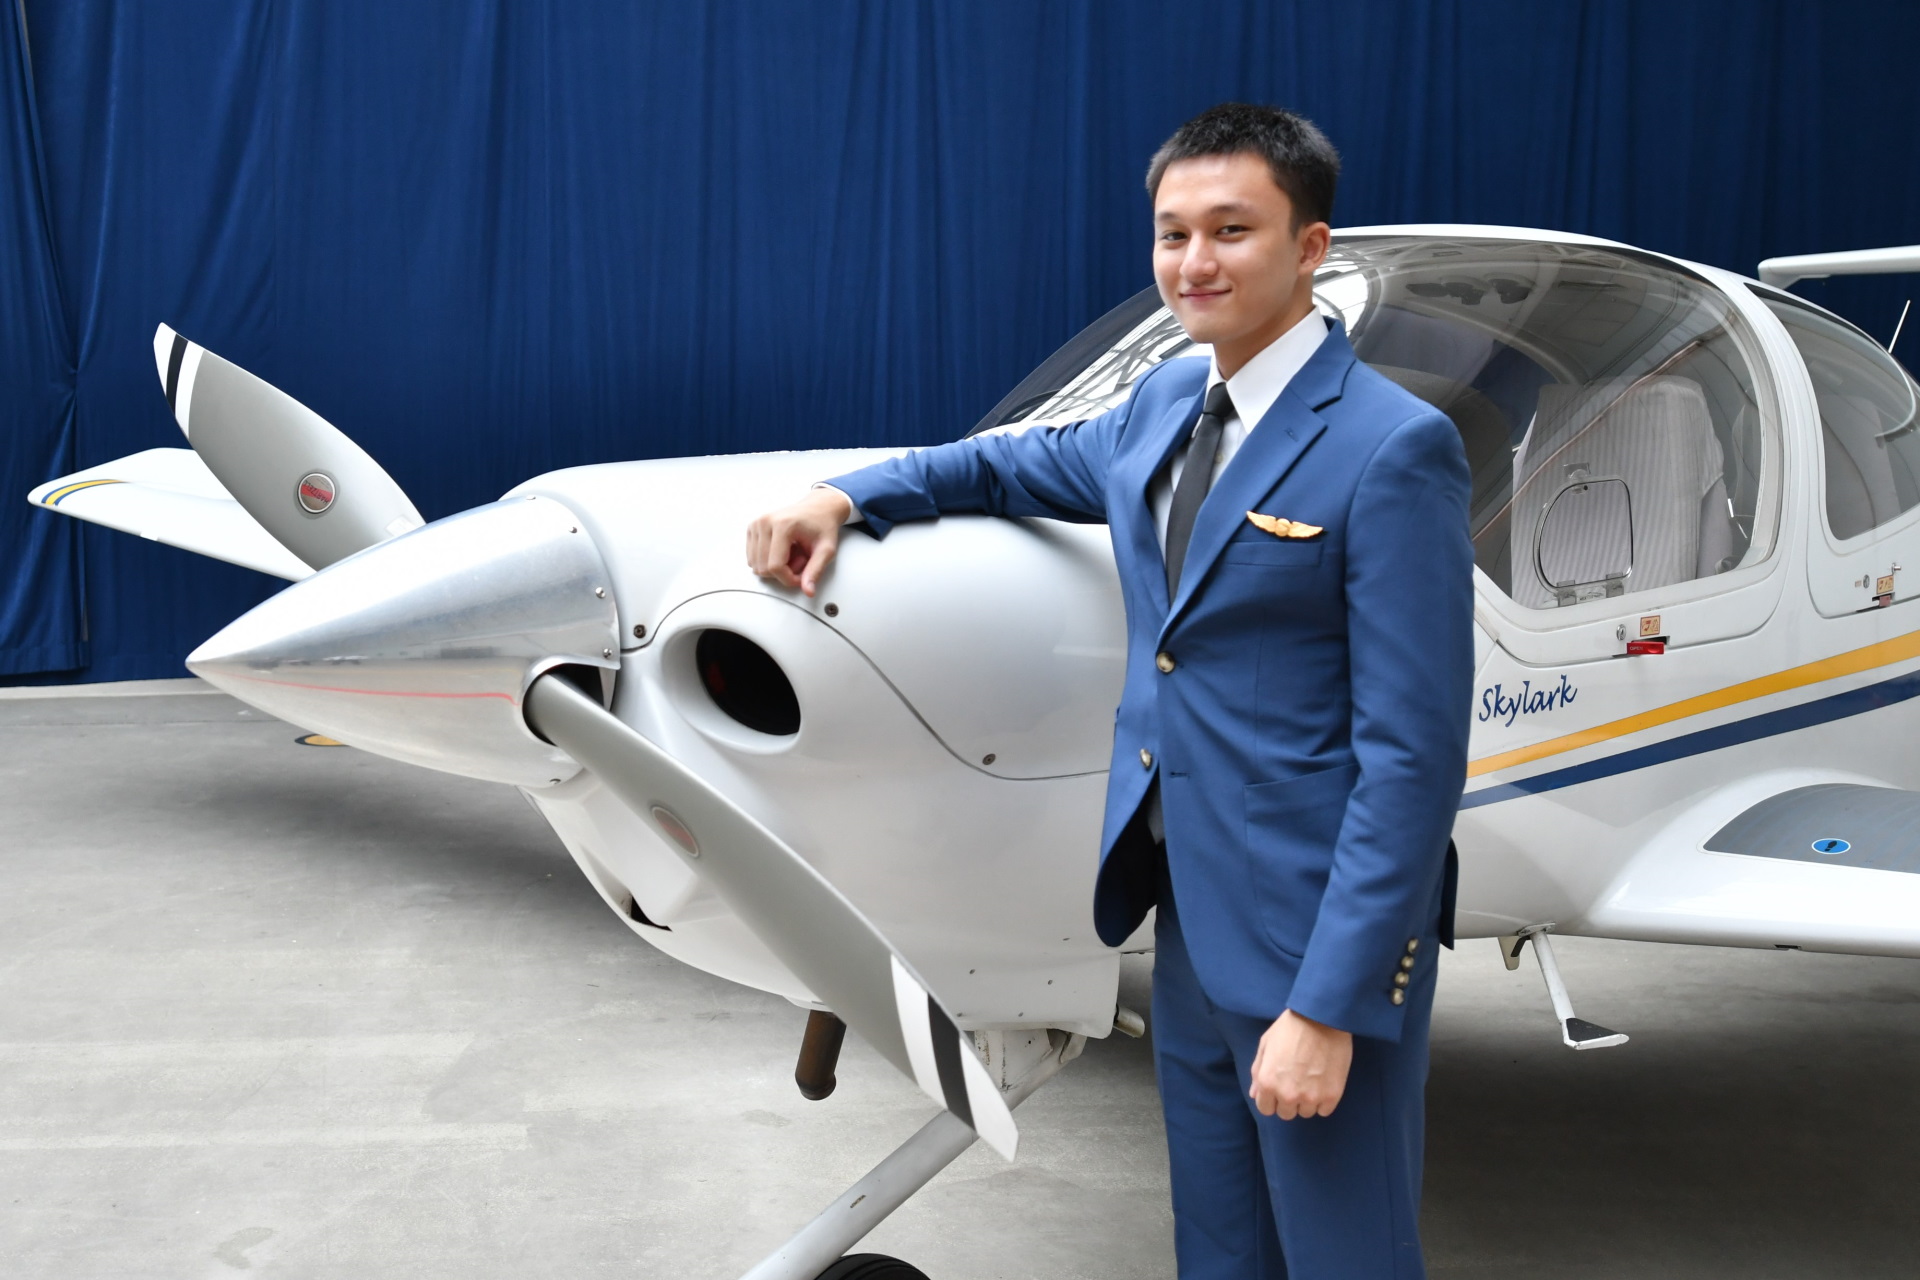 Model aircraft collector now flies for real